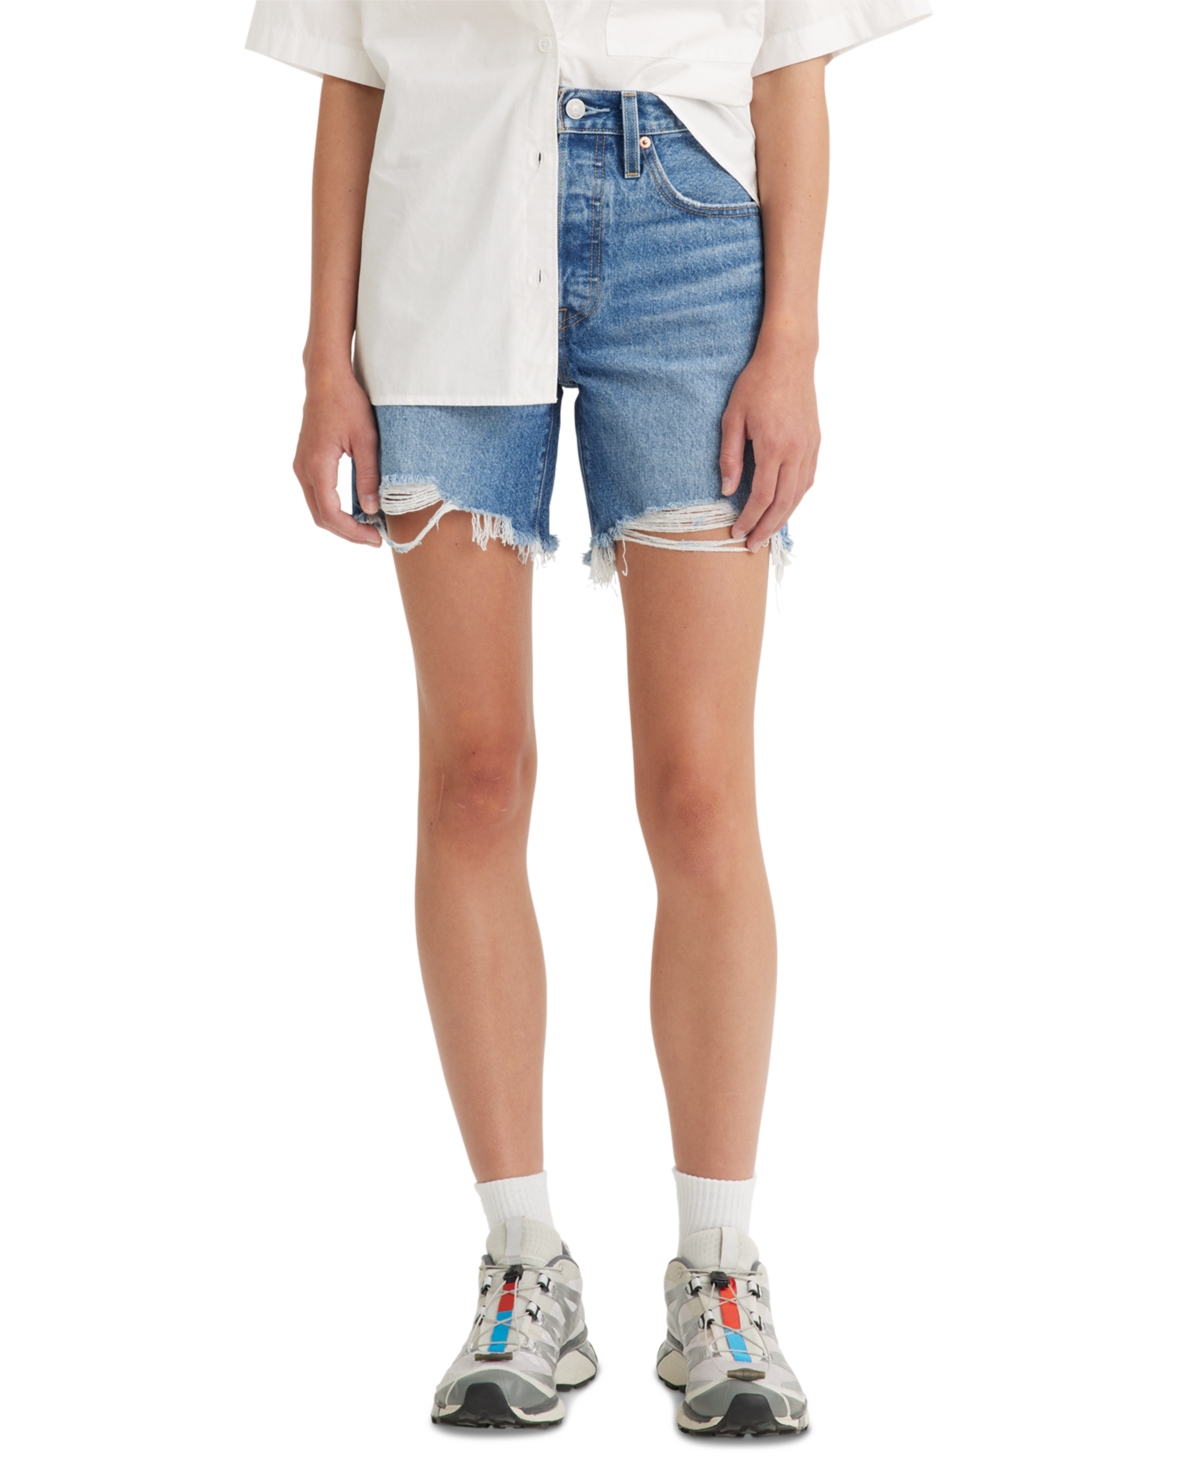 Levi's 501 Mid-thigh Denim Shorts In Well Sure